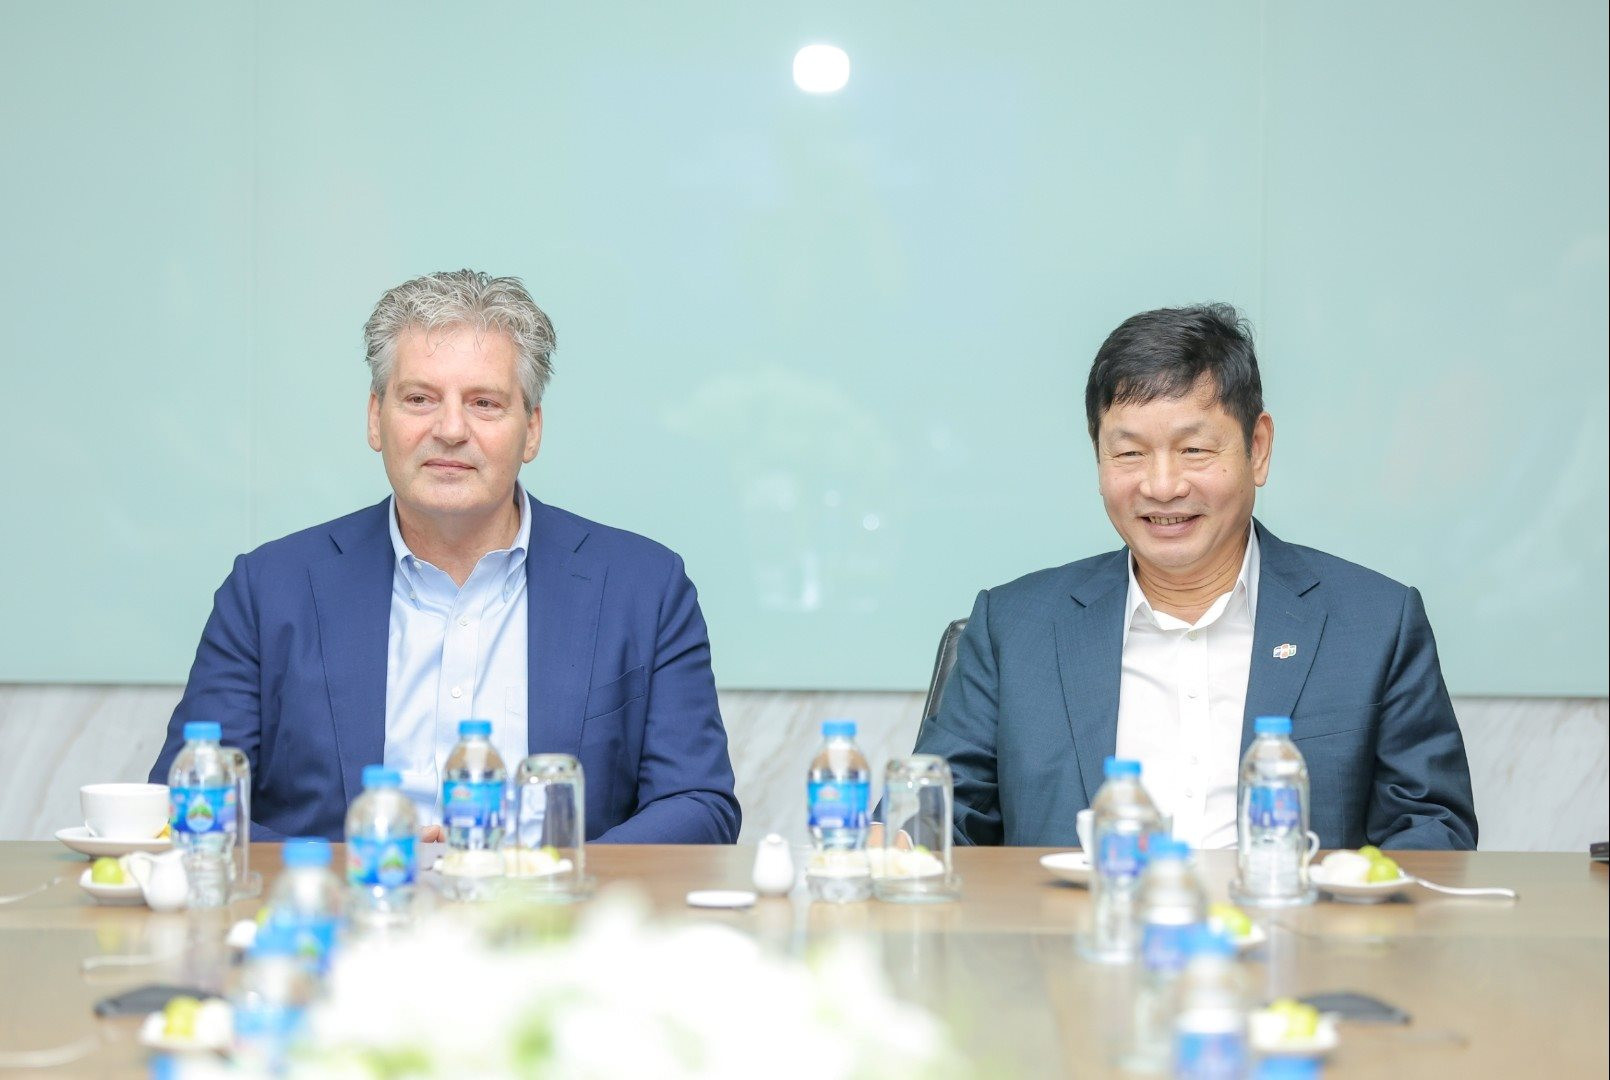 group-chief-transformation-technology-operations-officer-standard-chartered-roel-louwhoff-and-fpt-chairman-truong-gia-binh.jpg